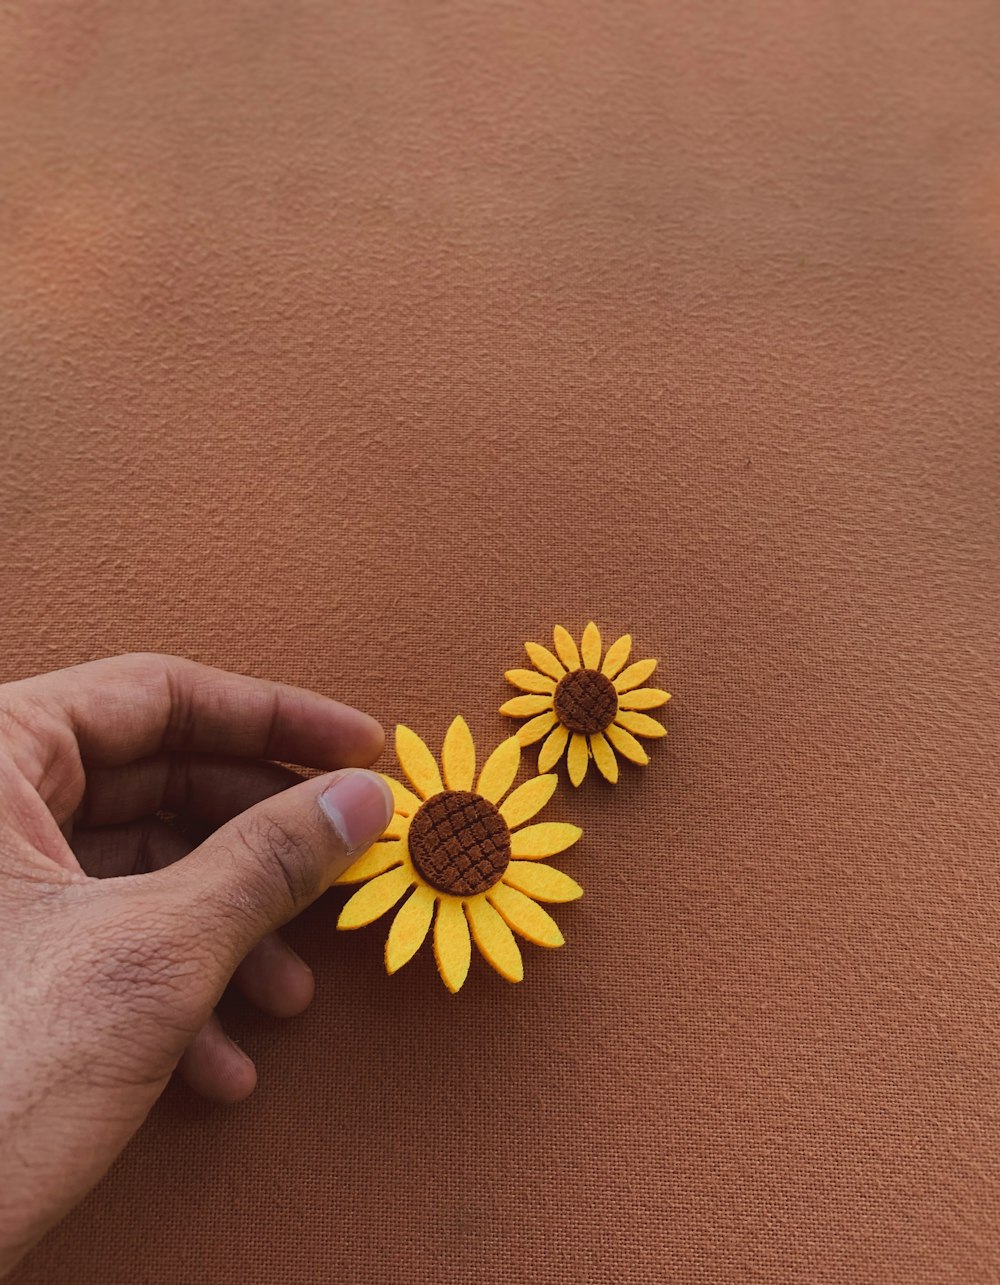 person holding yellow flower plastic toy